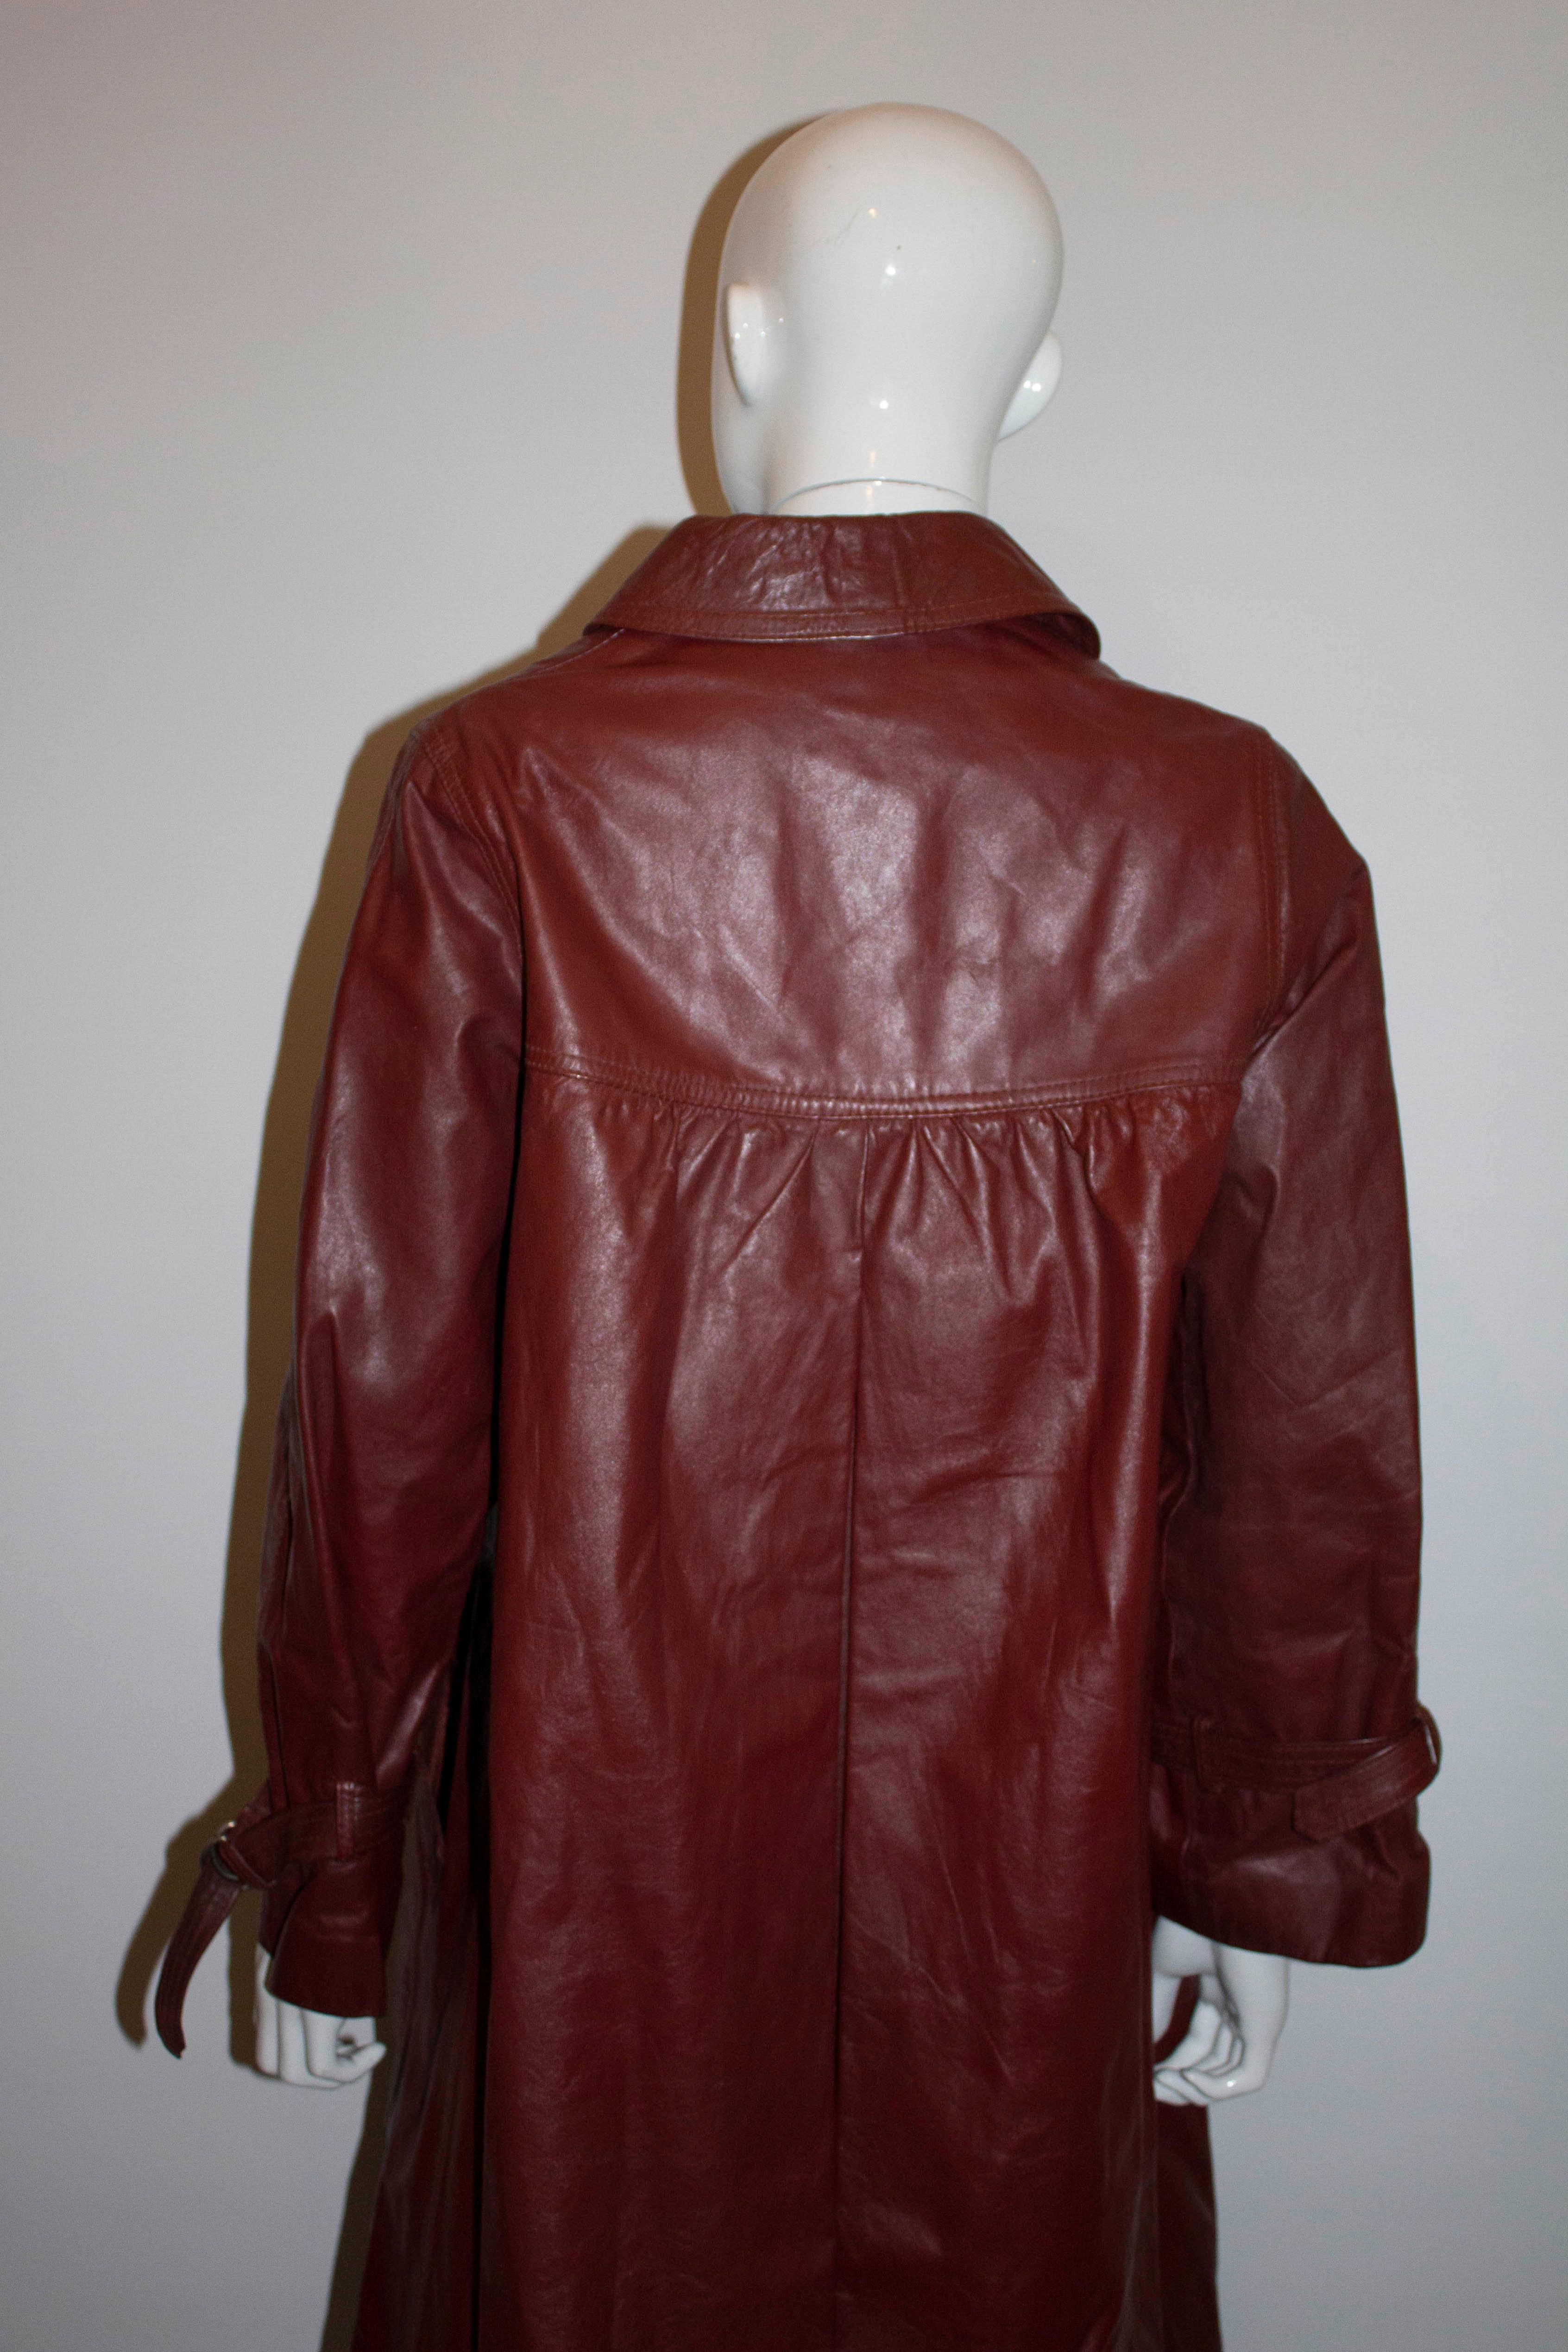 beged or leather jacket